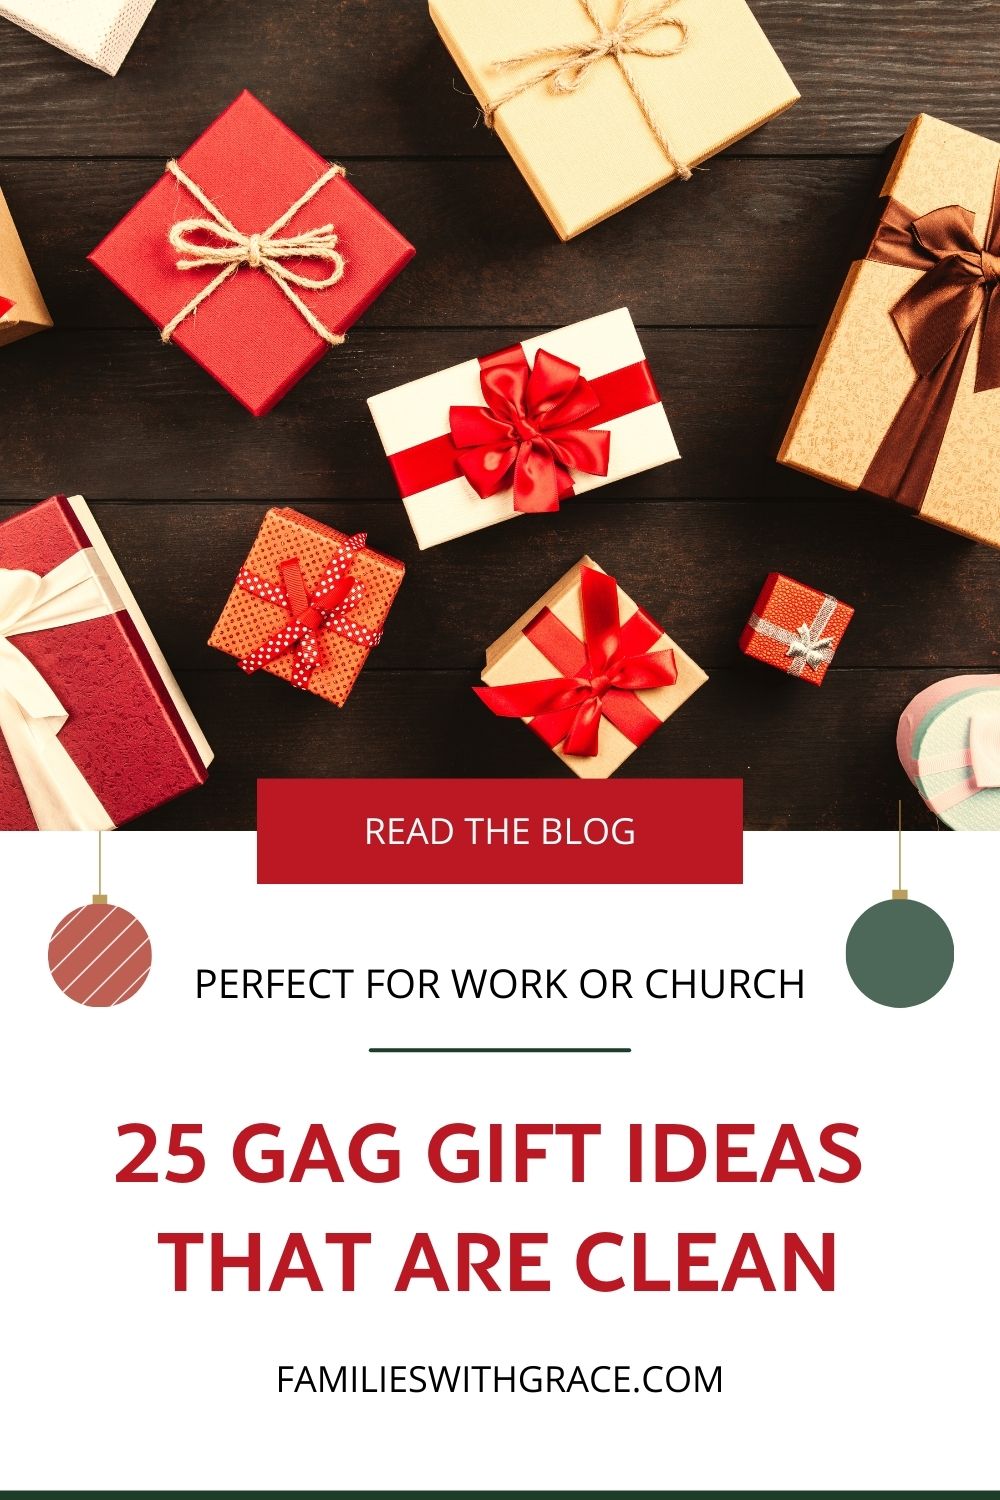 Funny Christmas gift ideas for coworkers: 25 clean gag gifts